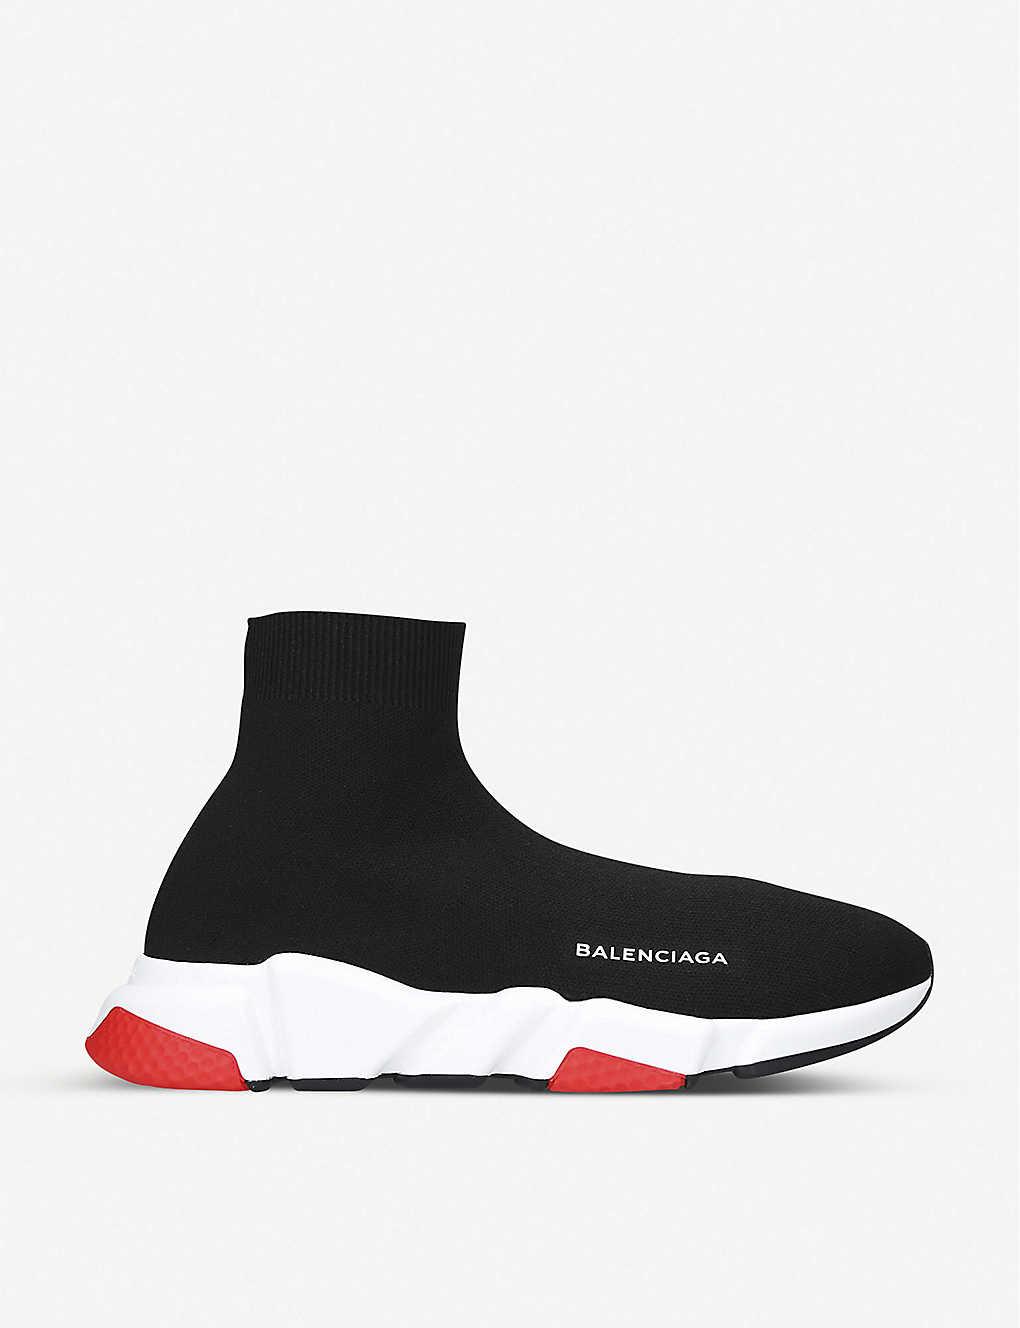 Balenciaga Synthetic Speed Stretch-knit Trainers in Black/Red/White ...